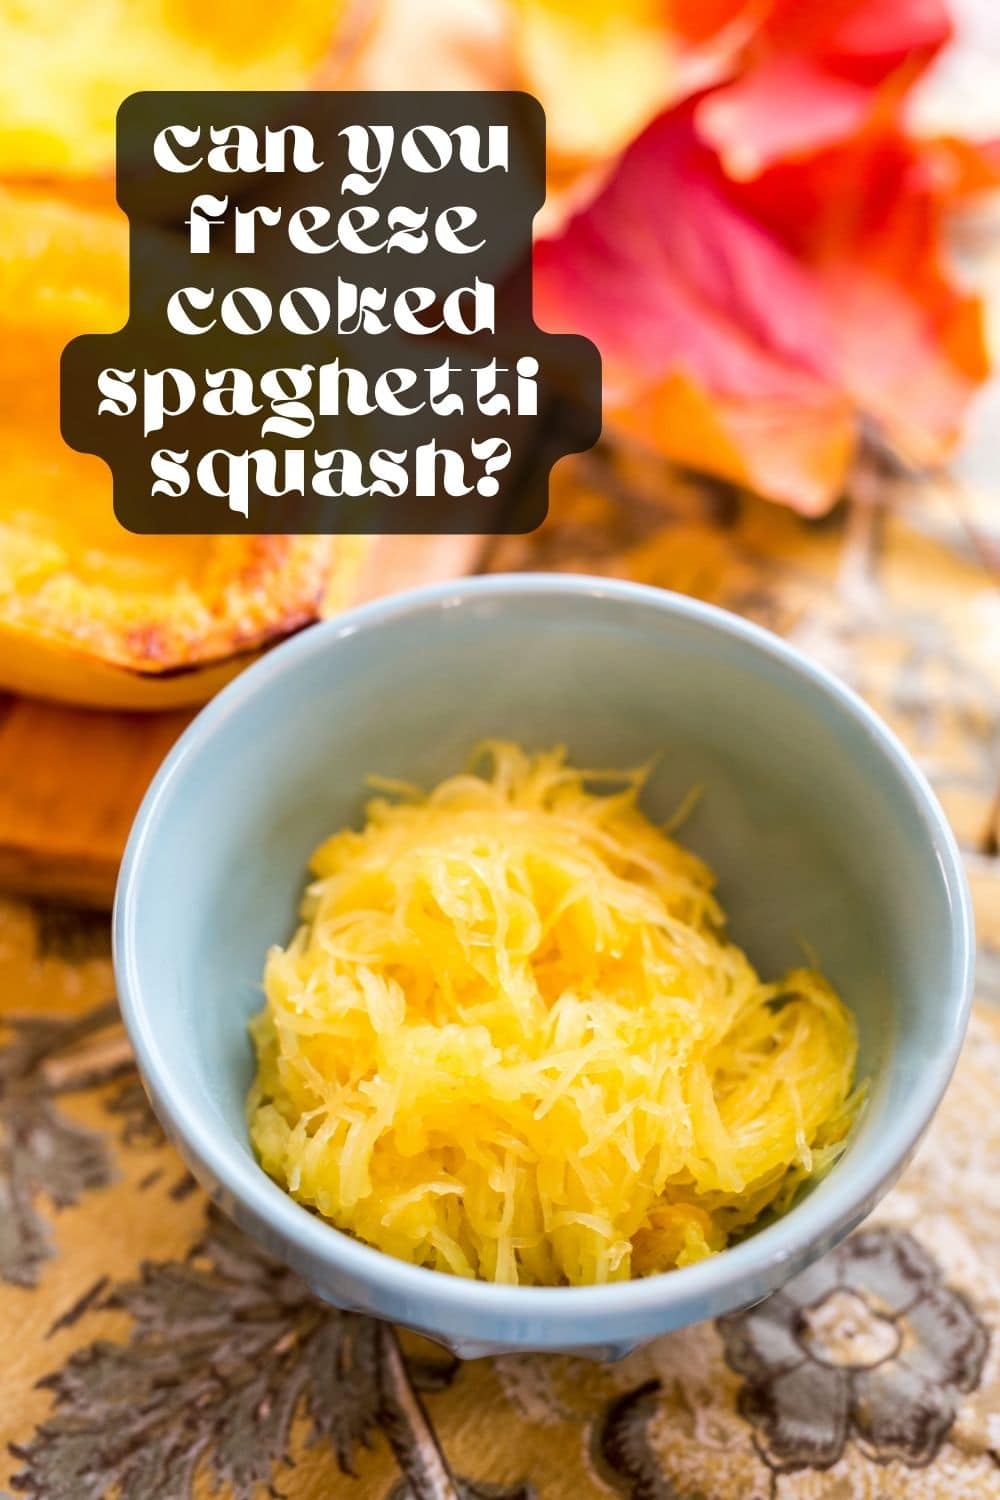 Spaghetti squash is one of my favorite winter veggies! It's super versatile, nutritious, and easy to cook. The only problem is how short spaghetti squash season is. They're usually harvested in the fall, which is when they taste the best. Which leads to the question: can you freeze spaghetti squash?